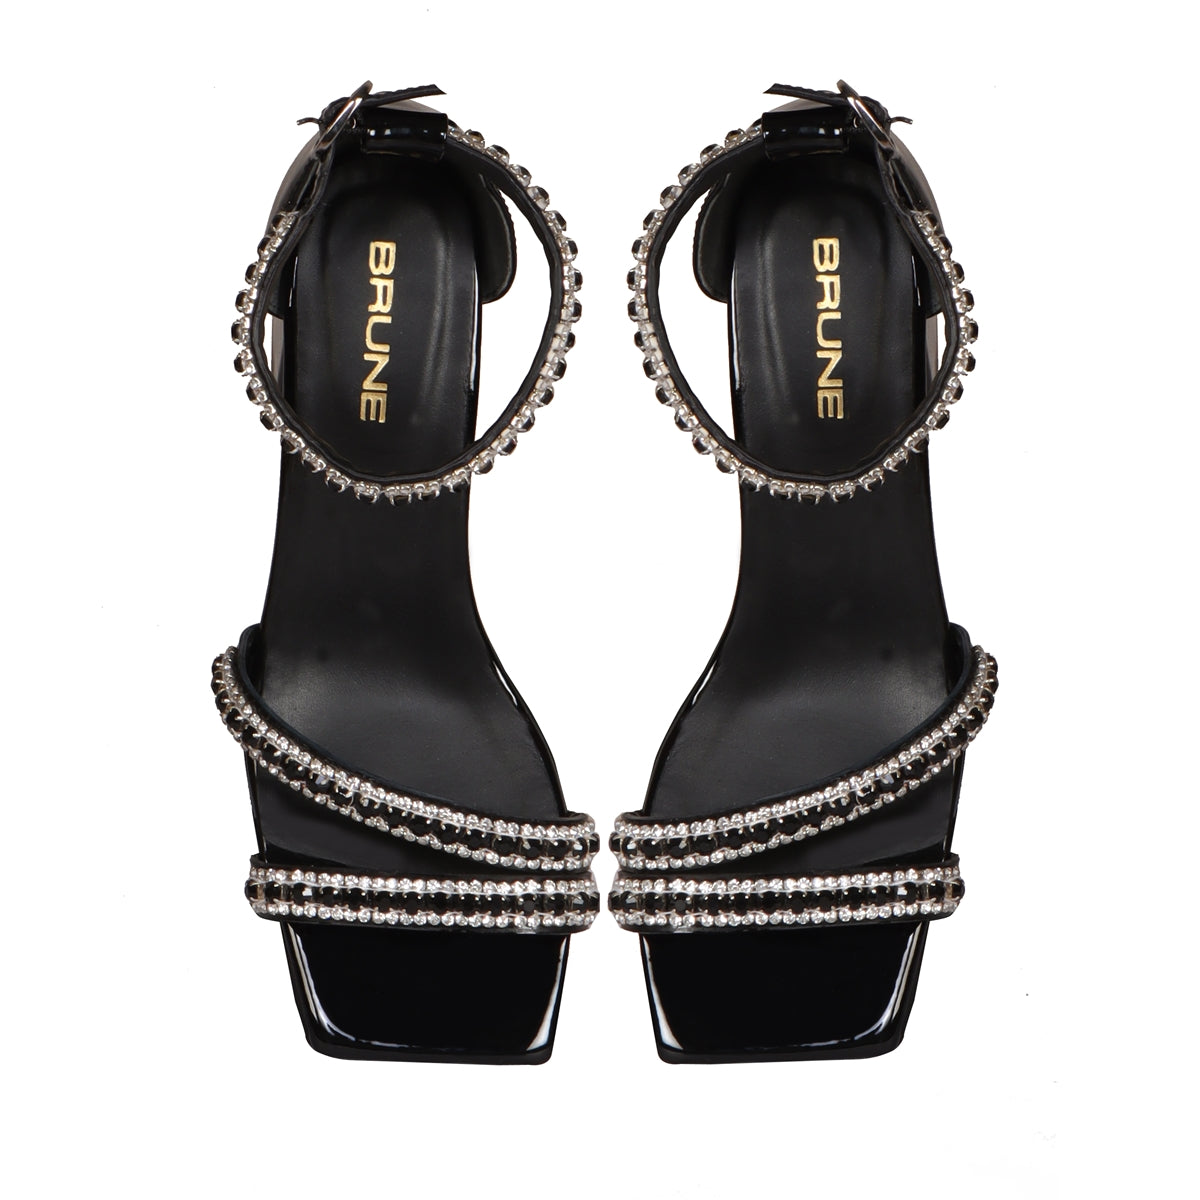 Stefany G-Chain Ankle Strap Pumps